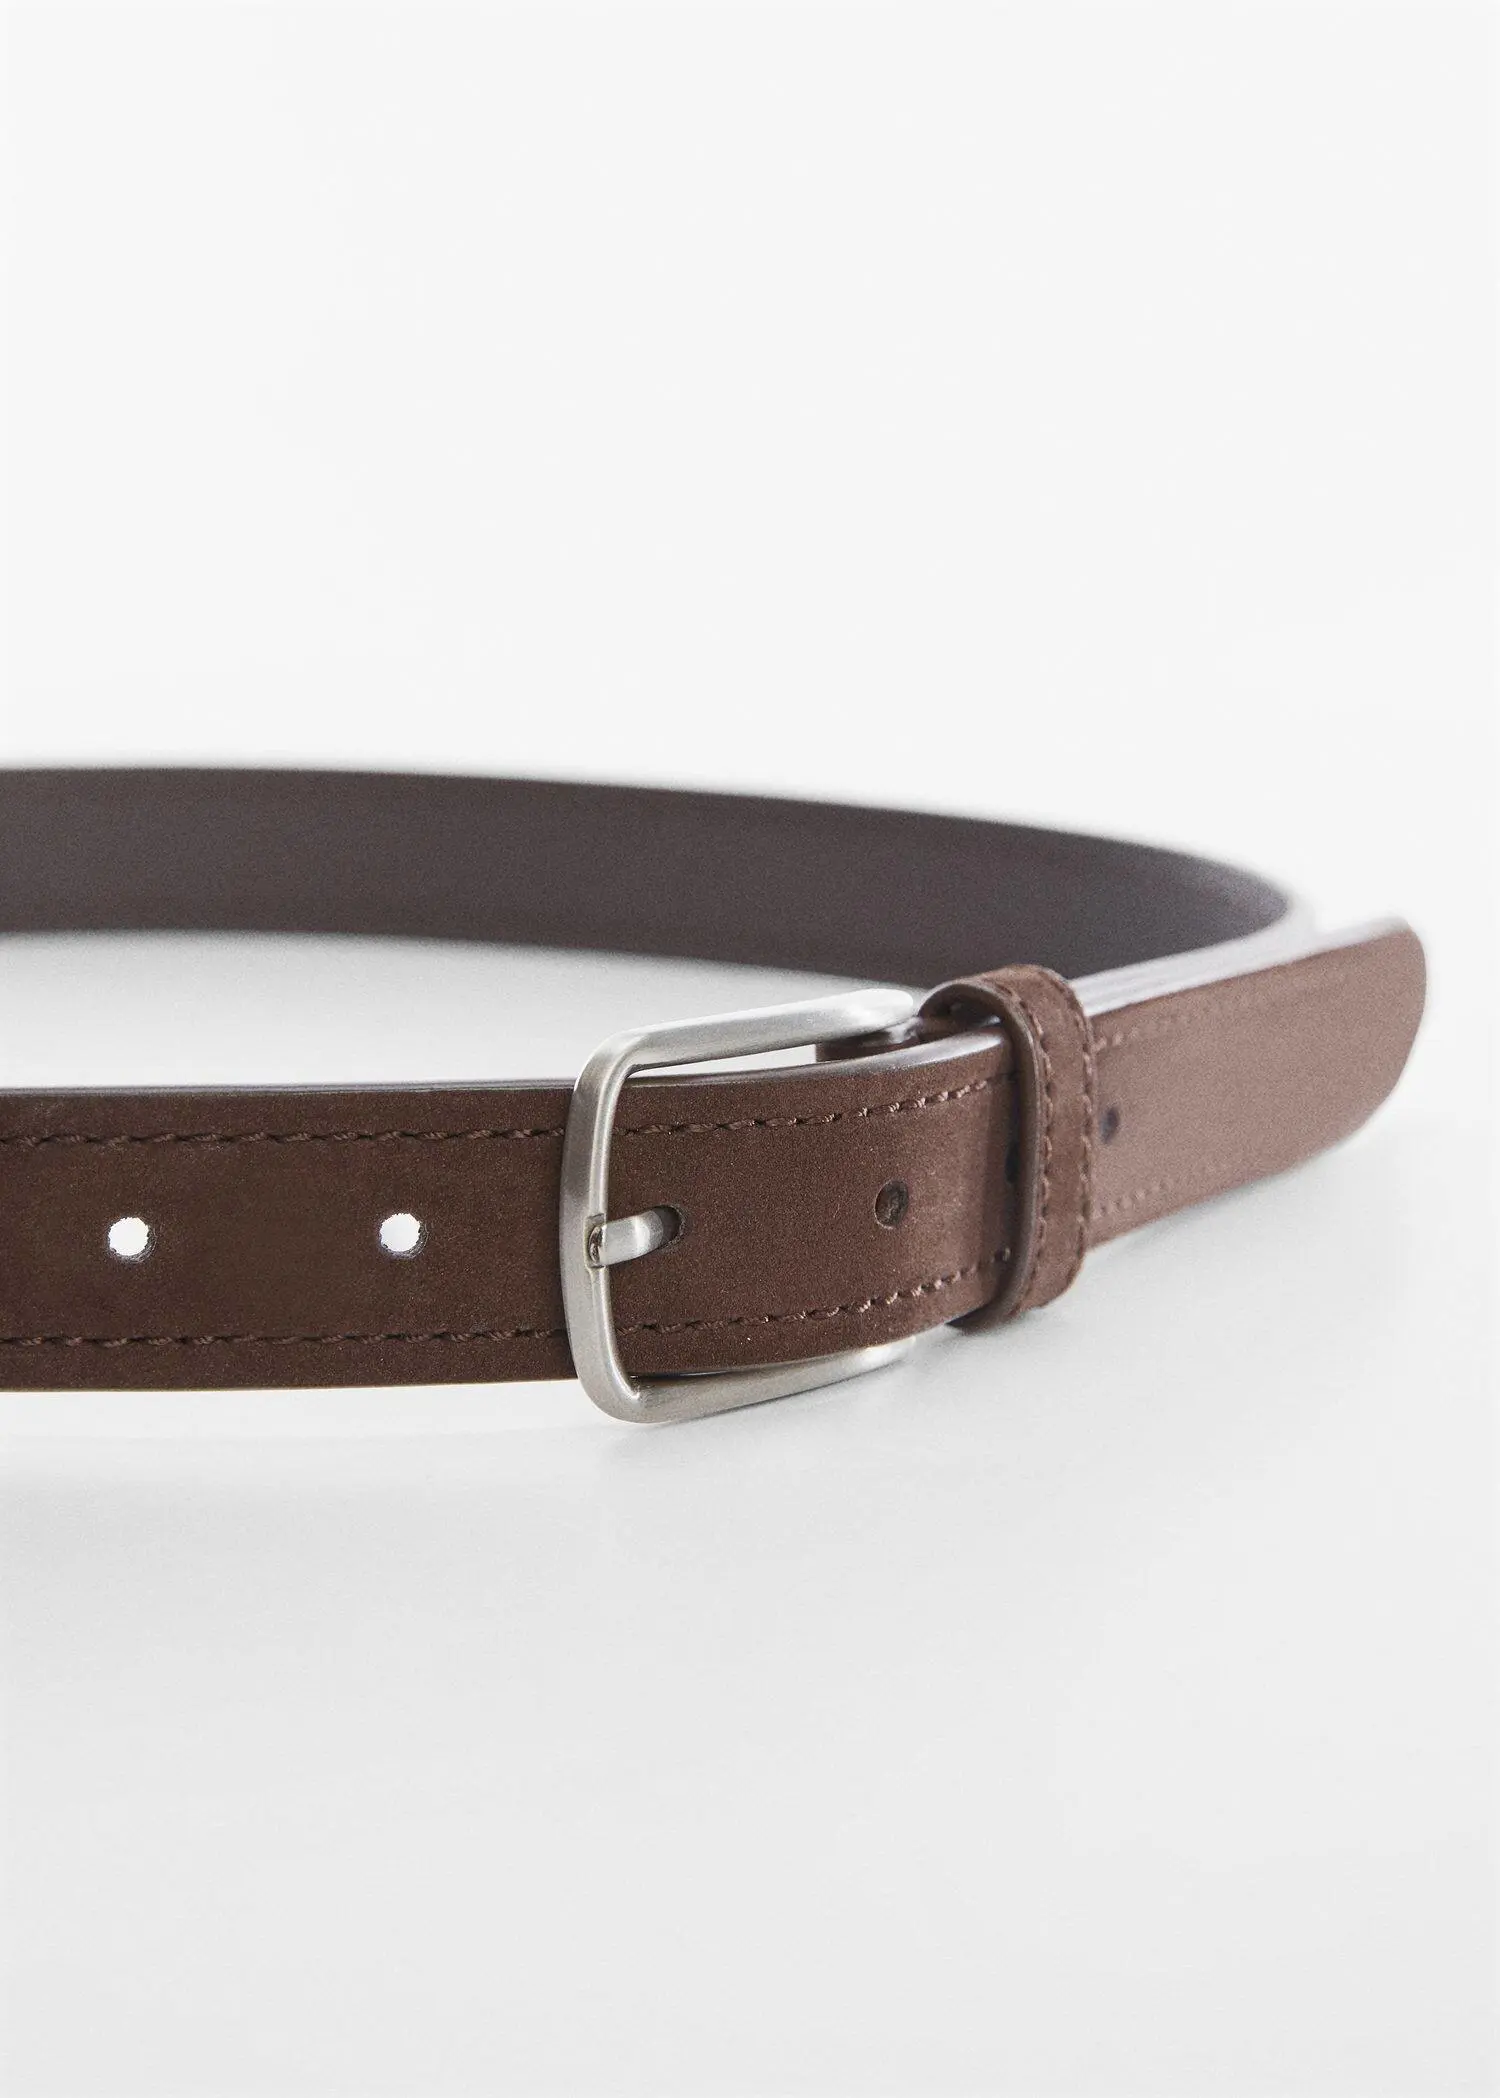 Mango Suede leather belt. a close-up of a brown leather belt with a silver buckle. 